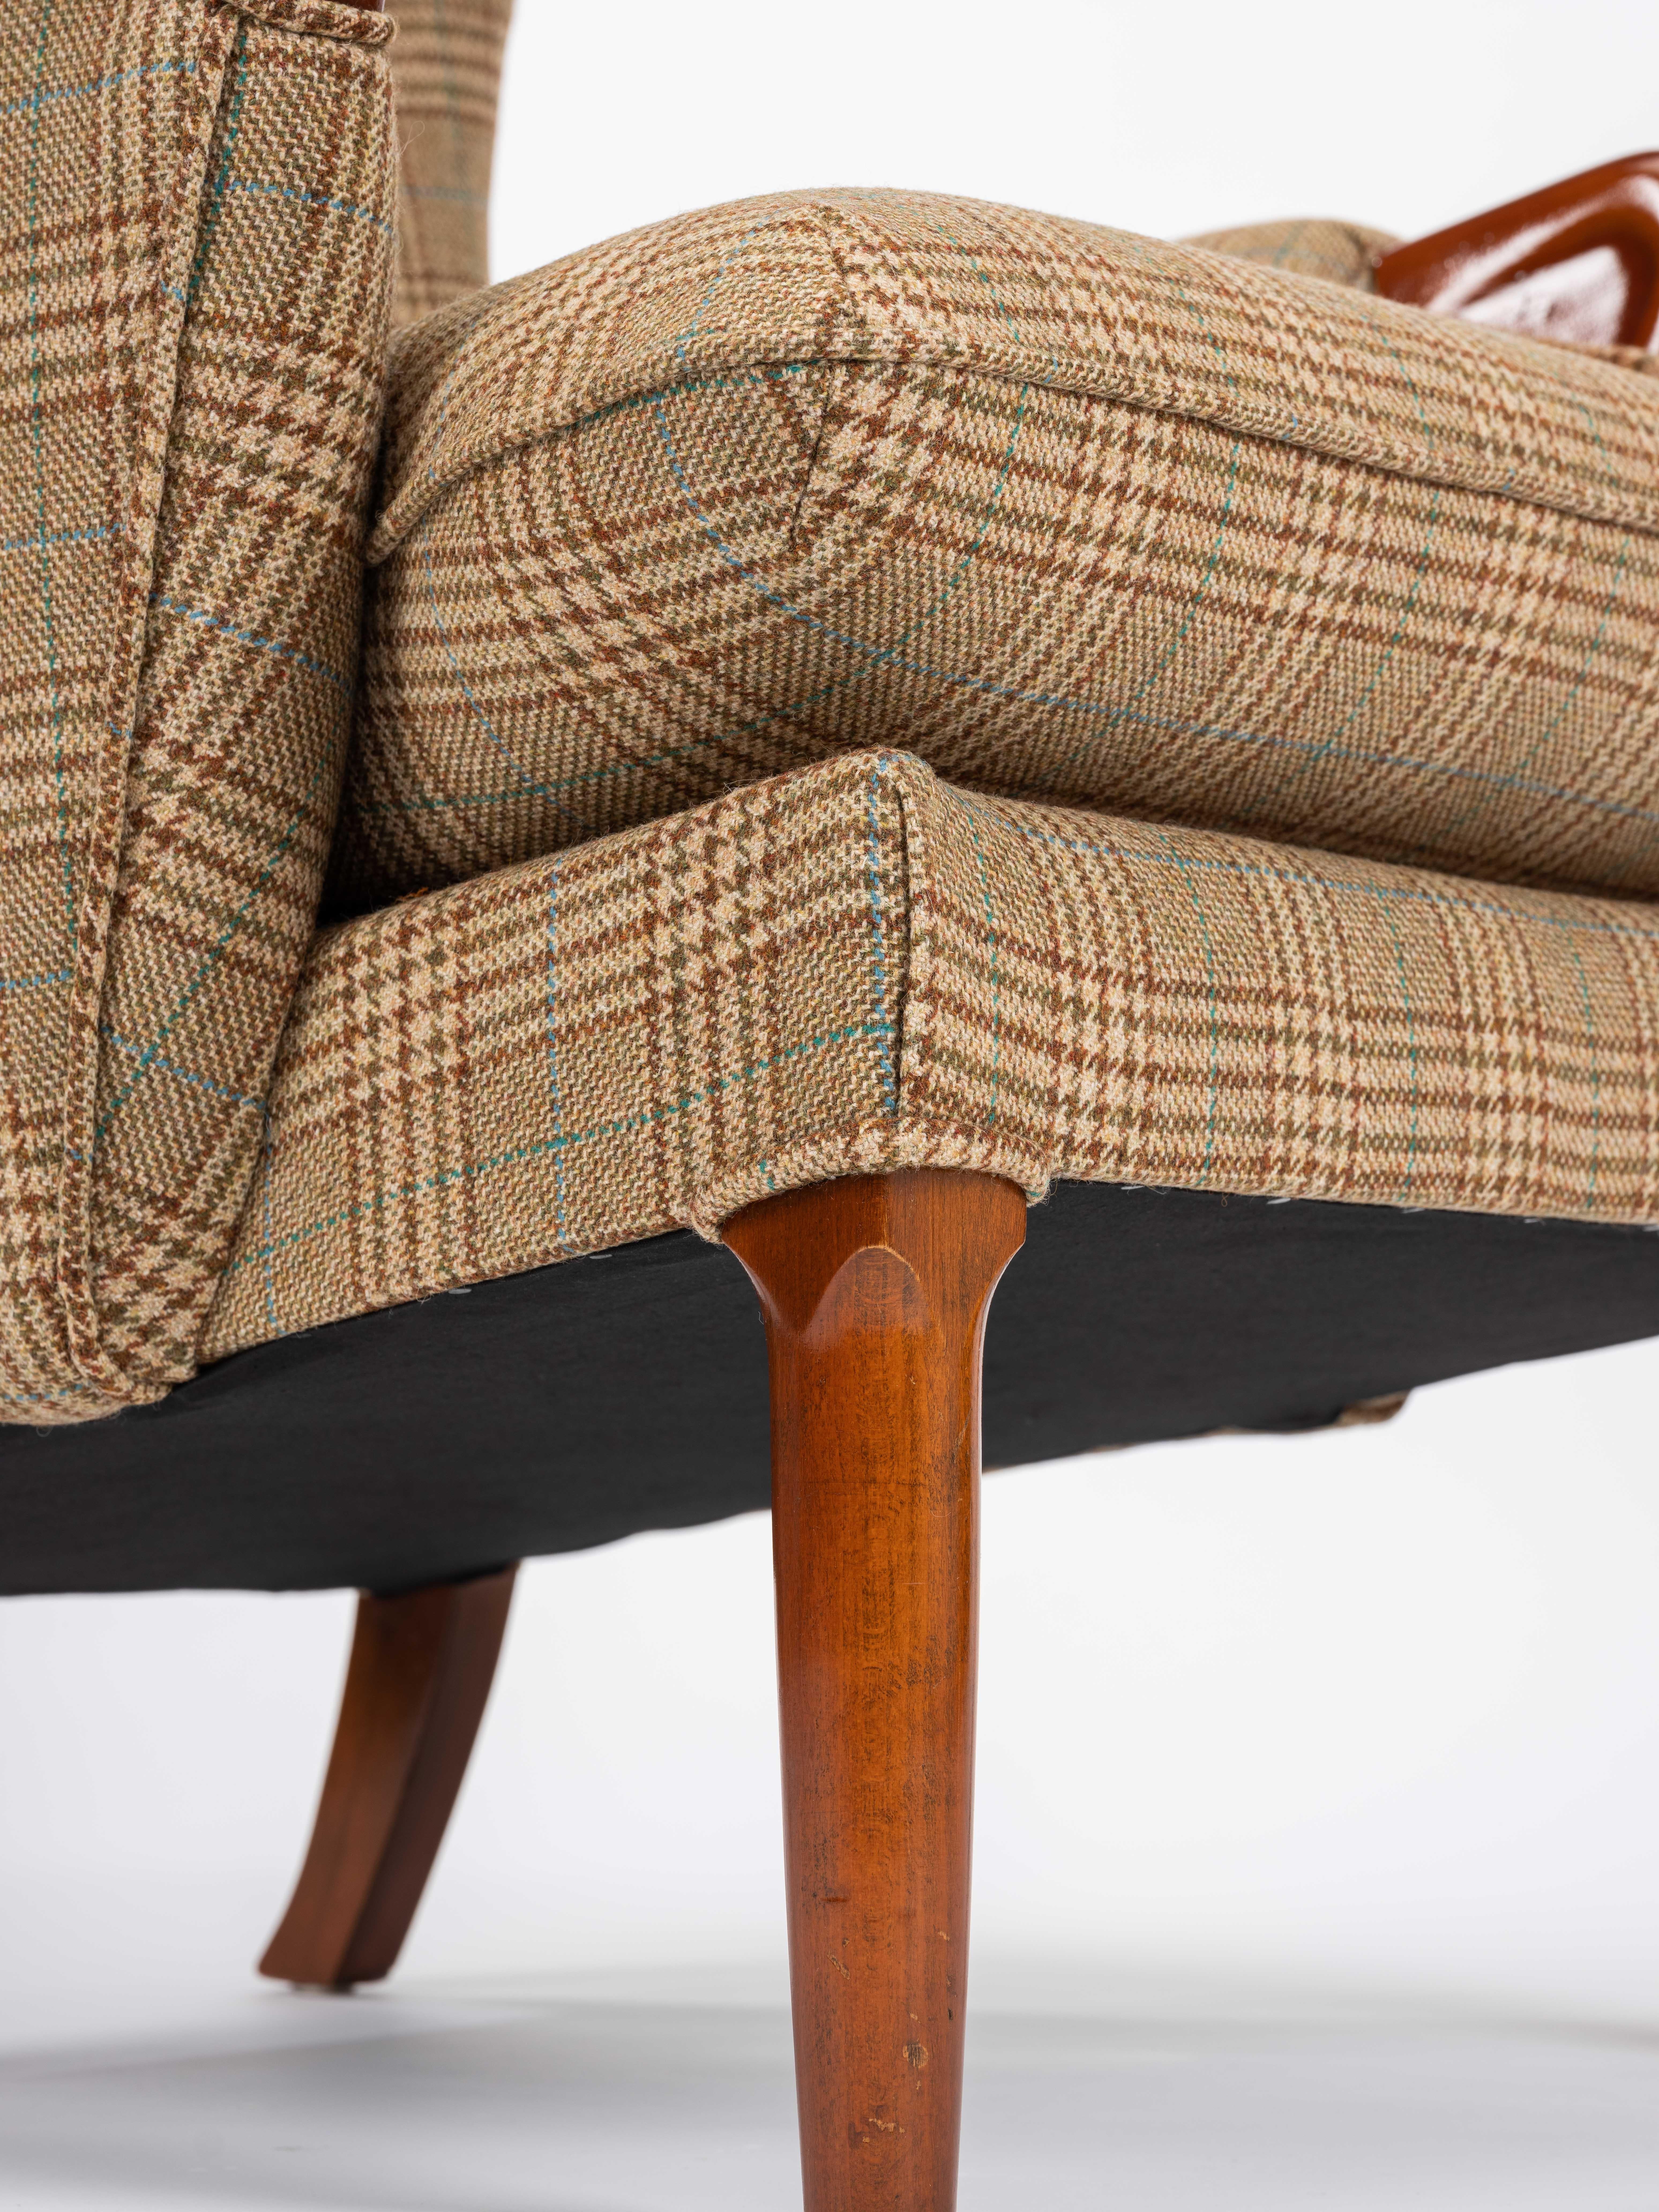 Mid-20th Century Midcentury Vintage Wingback Chairs Reupholstered in Yorkshire Tweed, circa 1960s